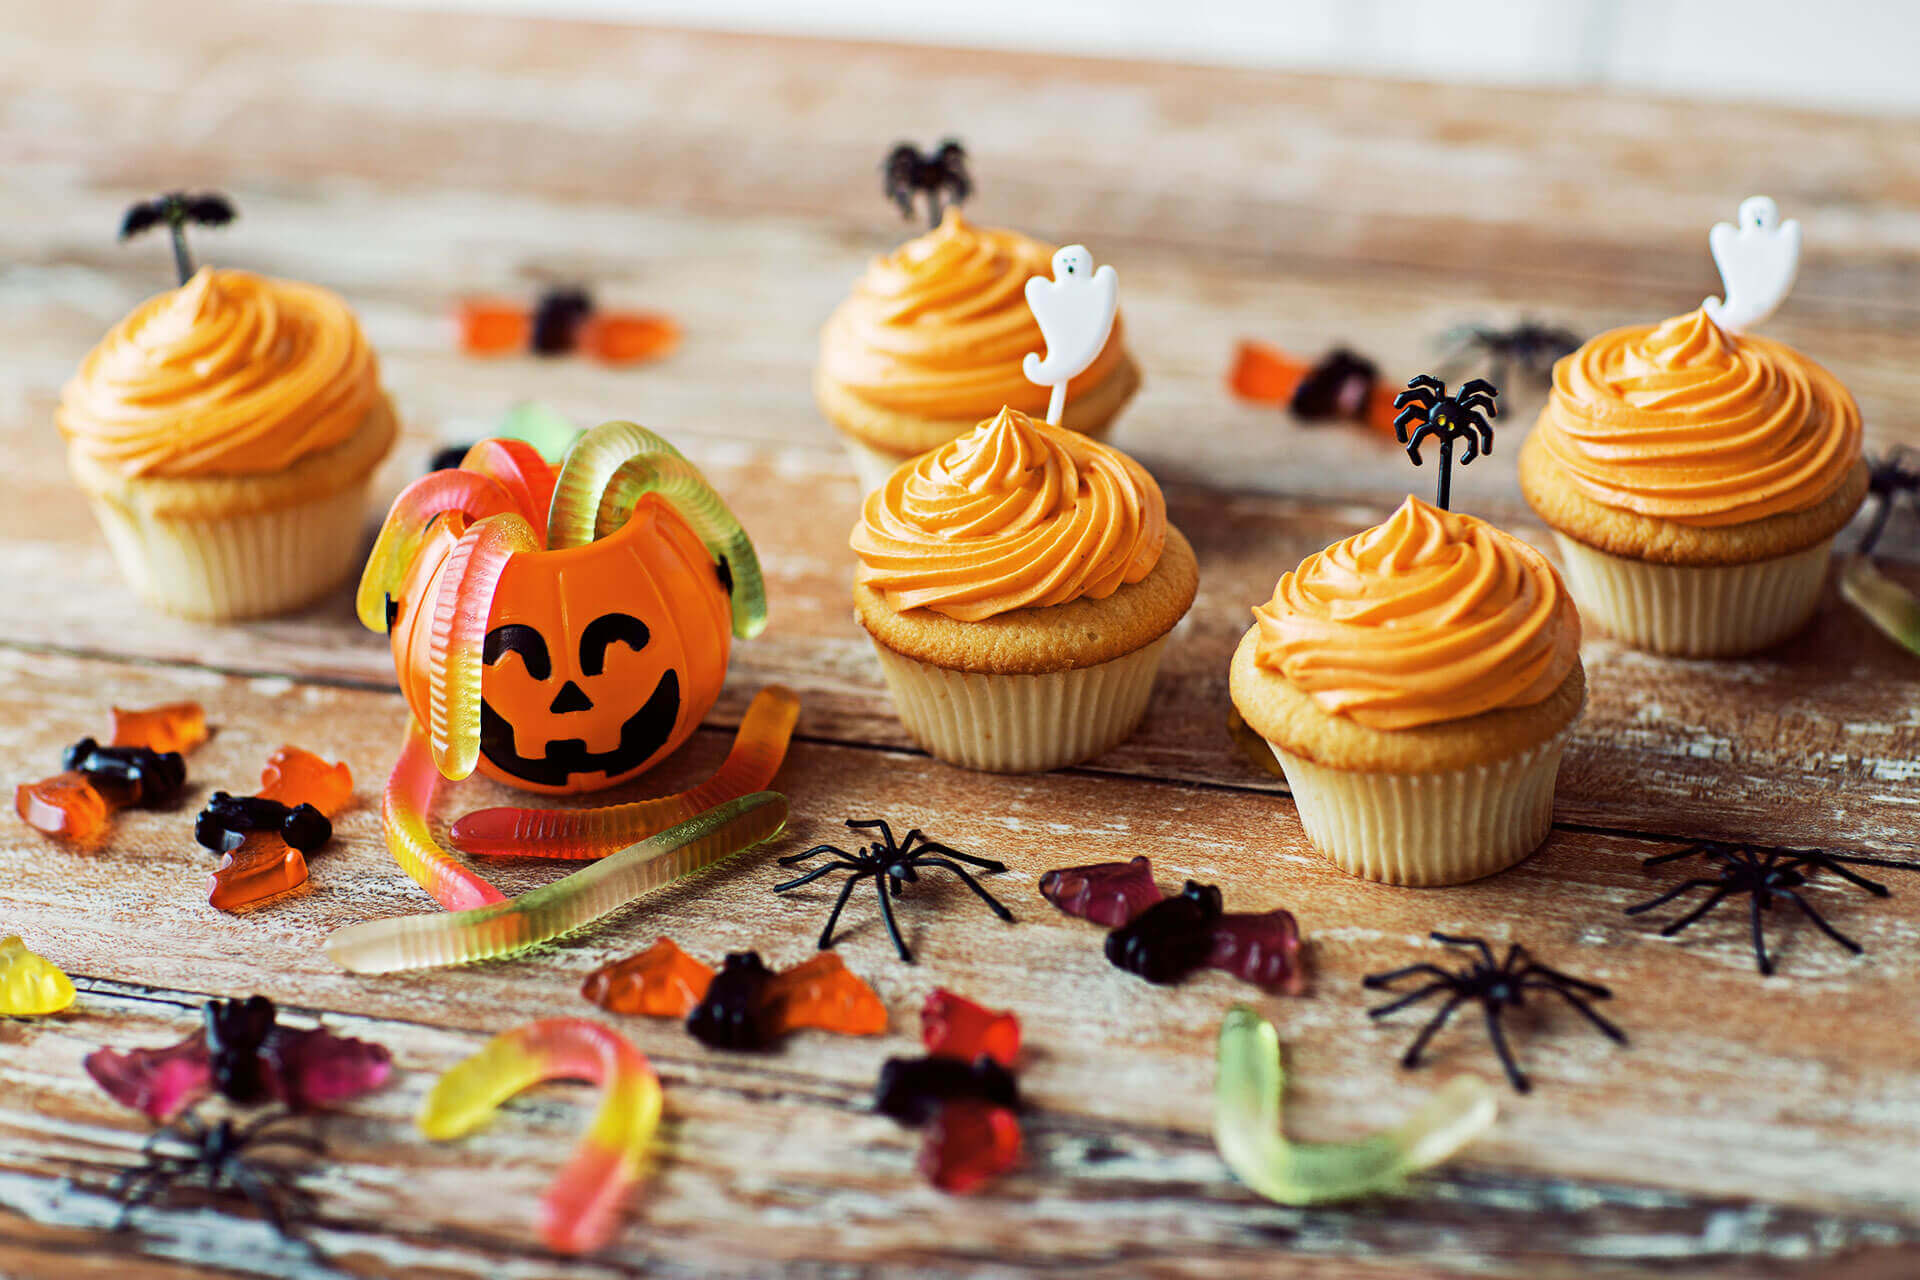 Halloween candy, cupcakes, and decorations on wooden table - halloween safety tips for dogs